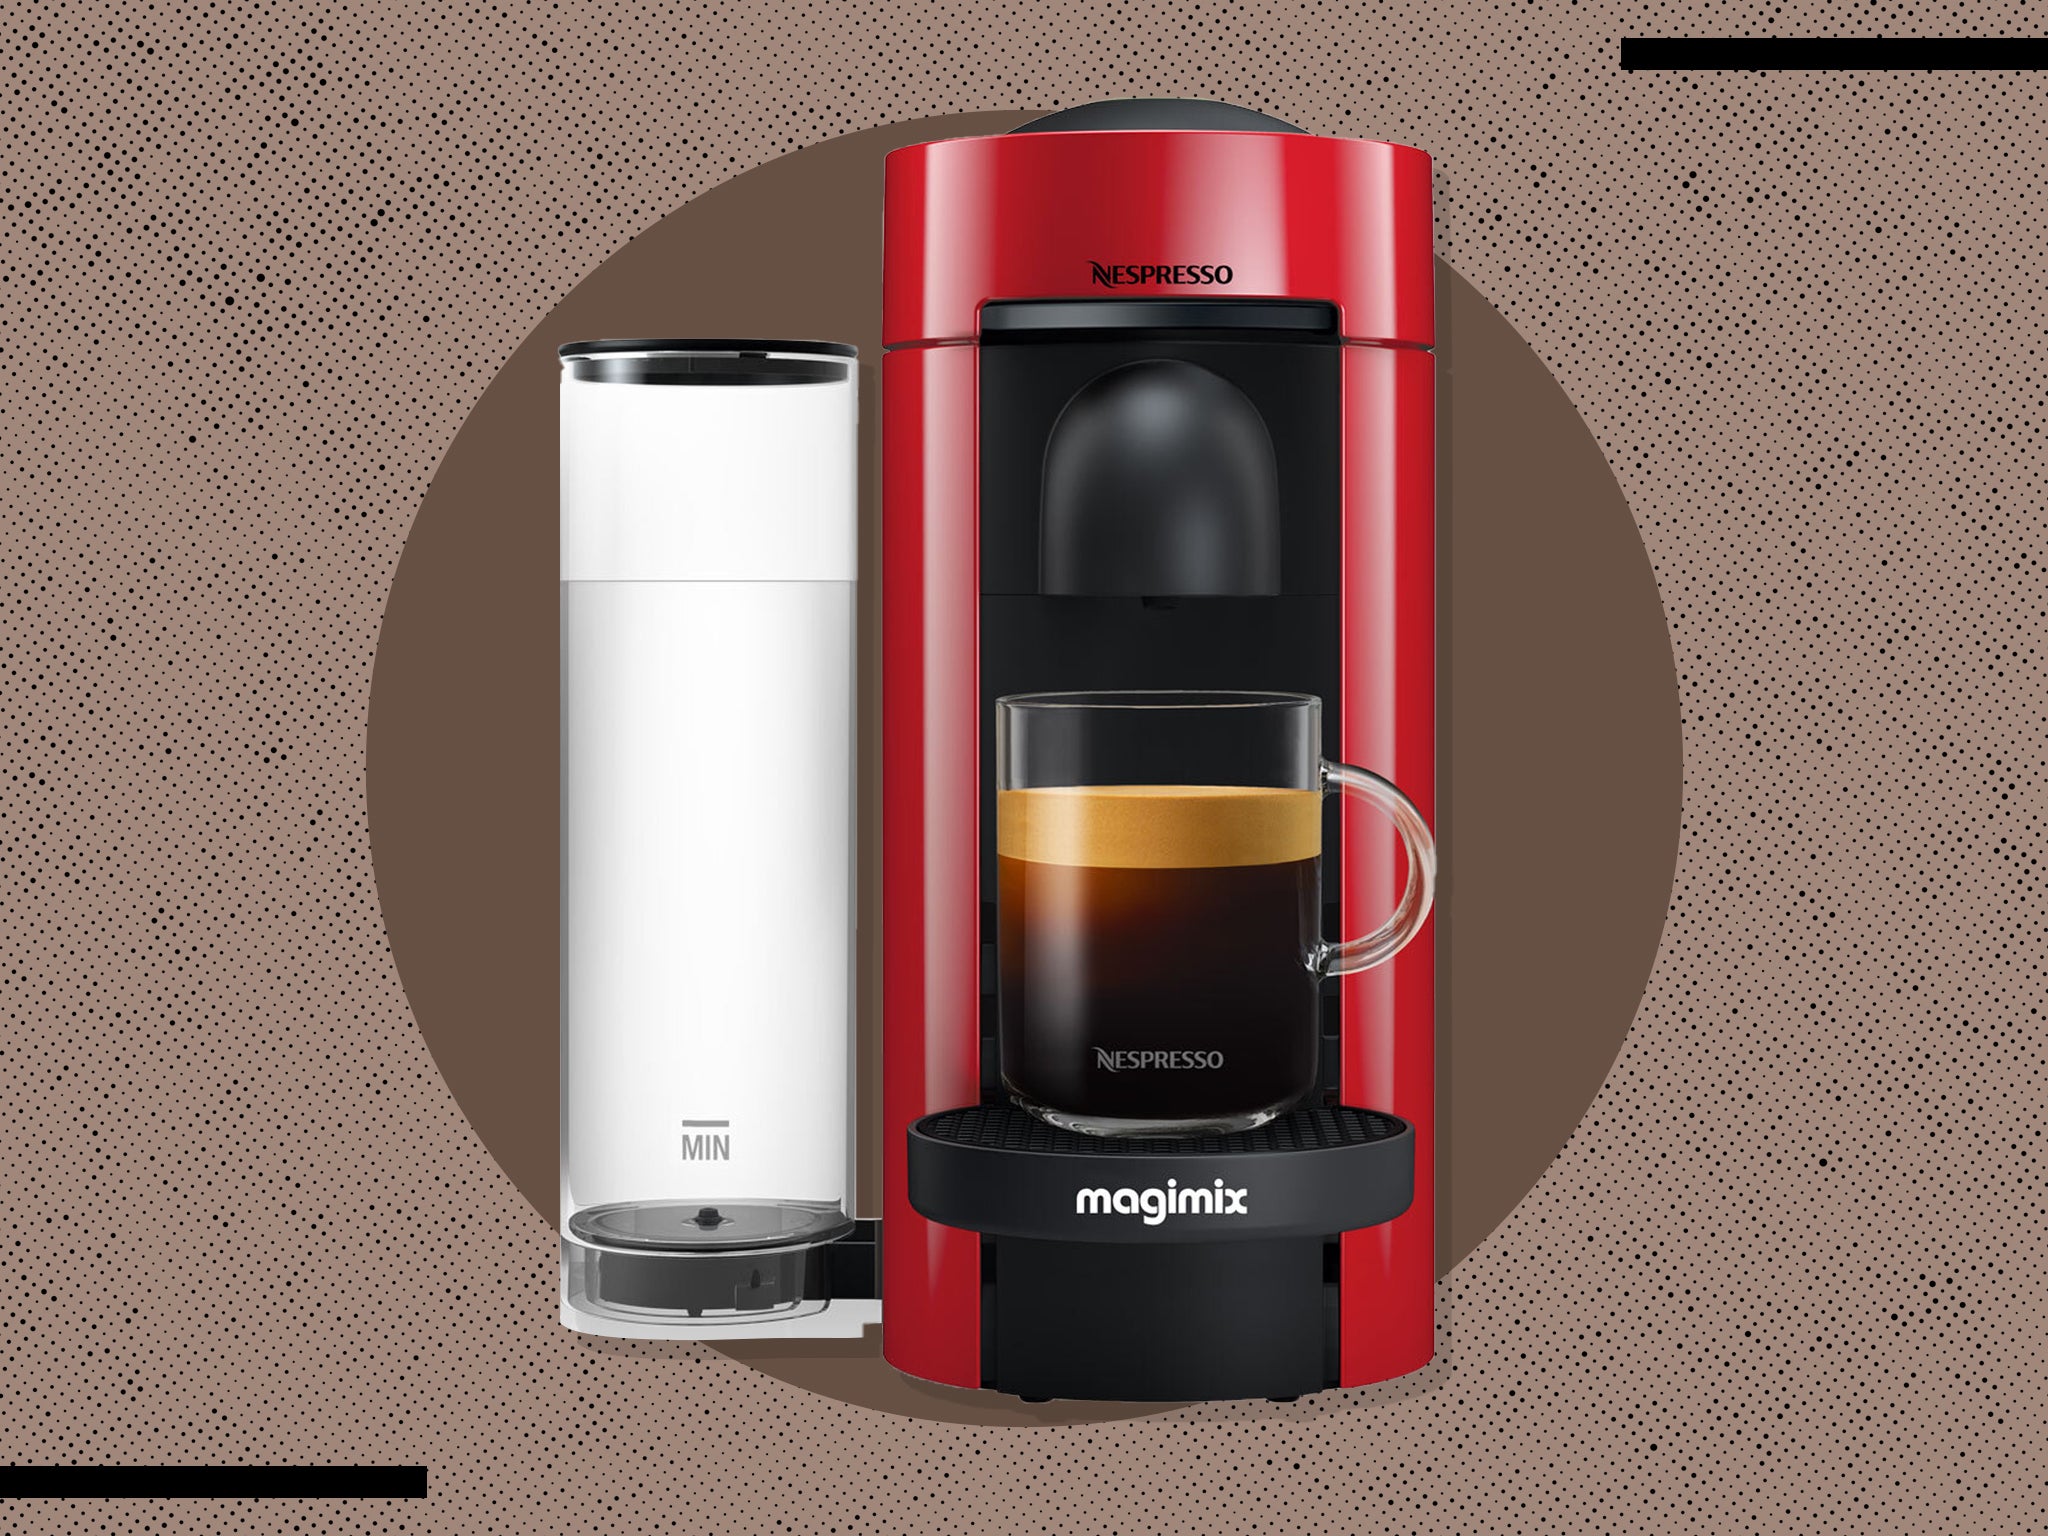 You can save over £100 on this Nespresso coffee machine that’s easy to use, simple to clean and delivers a great-tasting cup